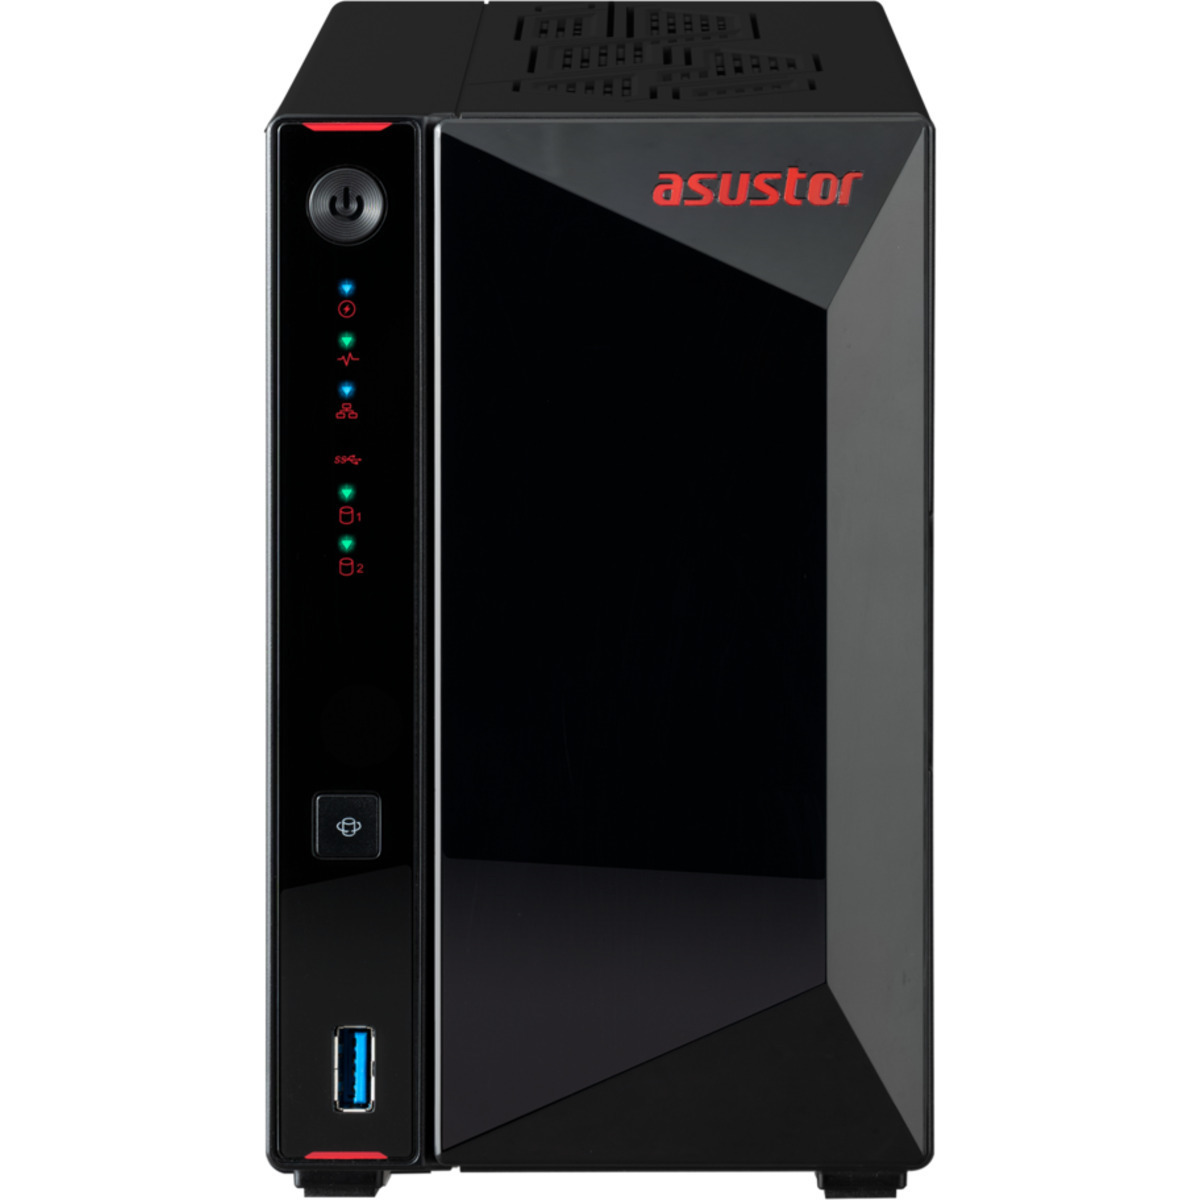 buy $1026 ASUSTOR Nimbustor 2 Gen2 AS5402T 8tb Desktop NAS - Network Attached Storage Device 2x4000gb Samsung 870 EVO MZ-77E4T0BAM 2.5 560/530MB/s SATA 6Gb/s SSD CONSUMER Class Drives Installed - Burn-In Tested - FREE RAM UPGRADE - nas headquarters buy network attached storage server device das new raid-5 free shipping simply usa Nimbustor 2 Gen2 AS5402T